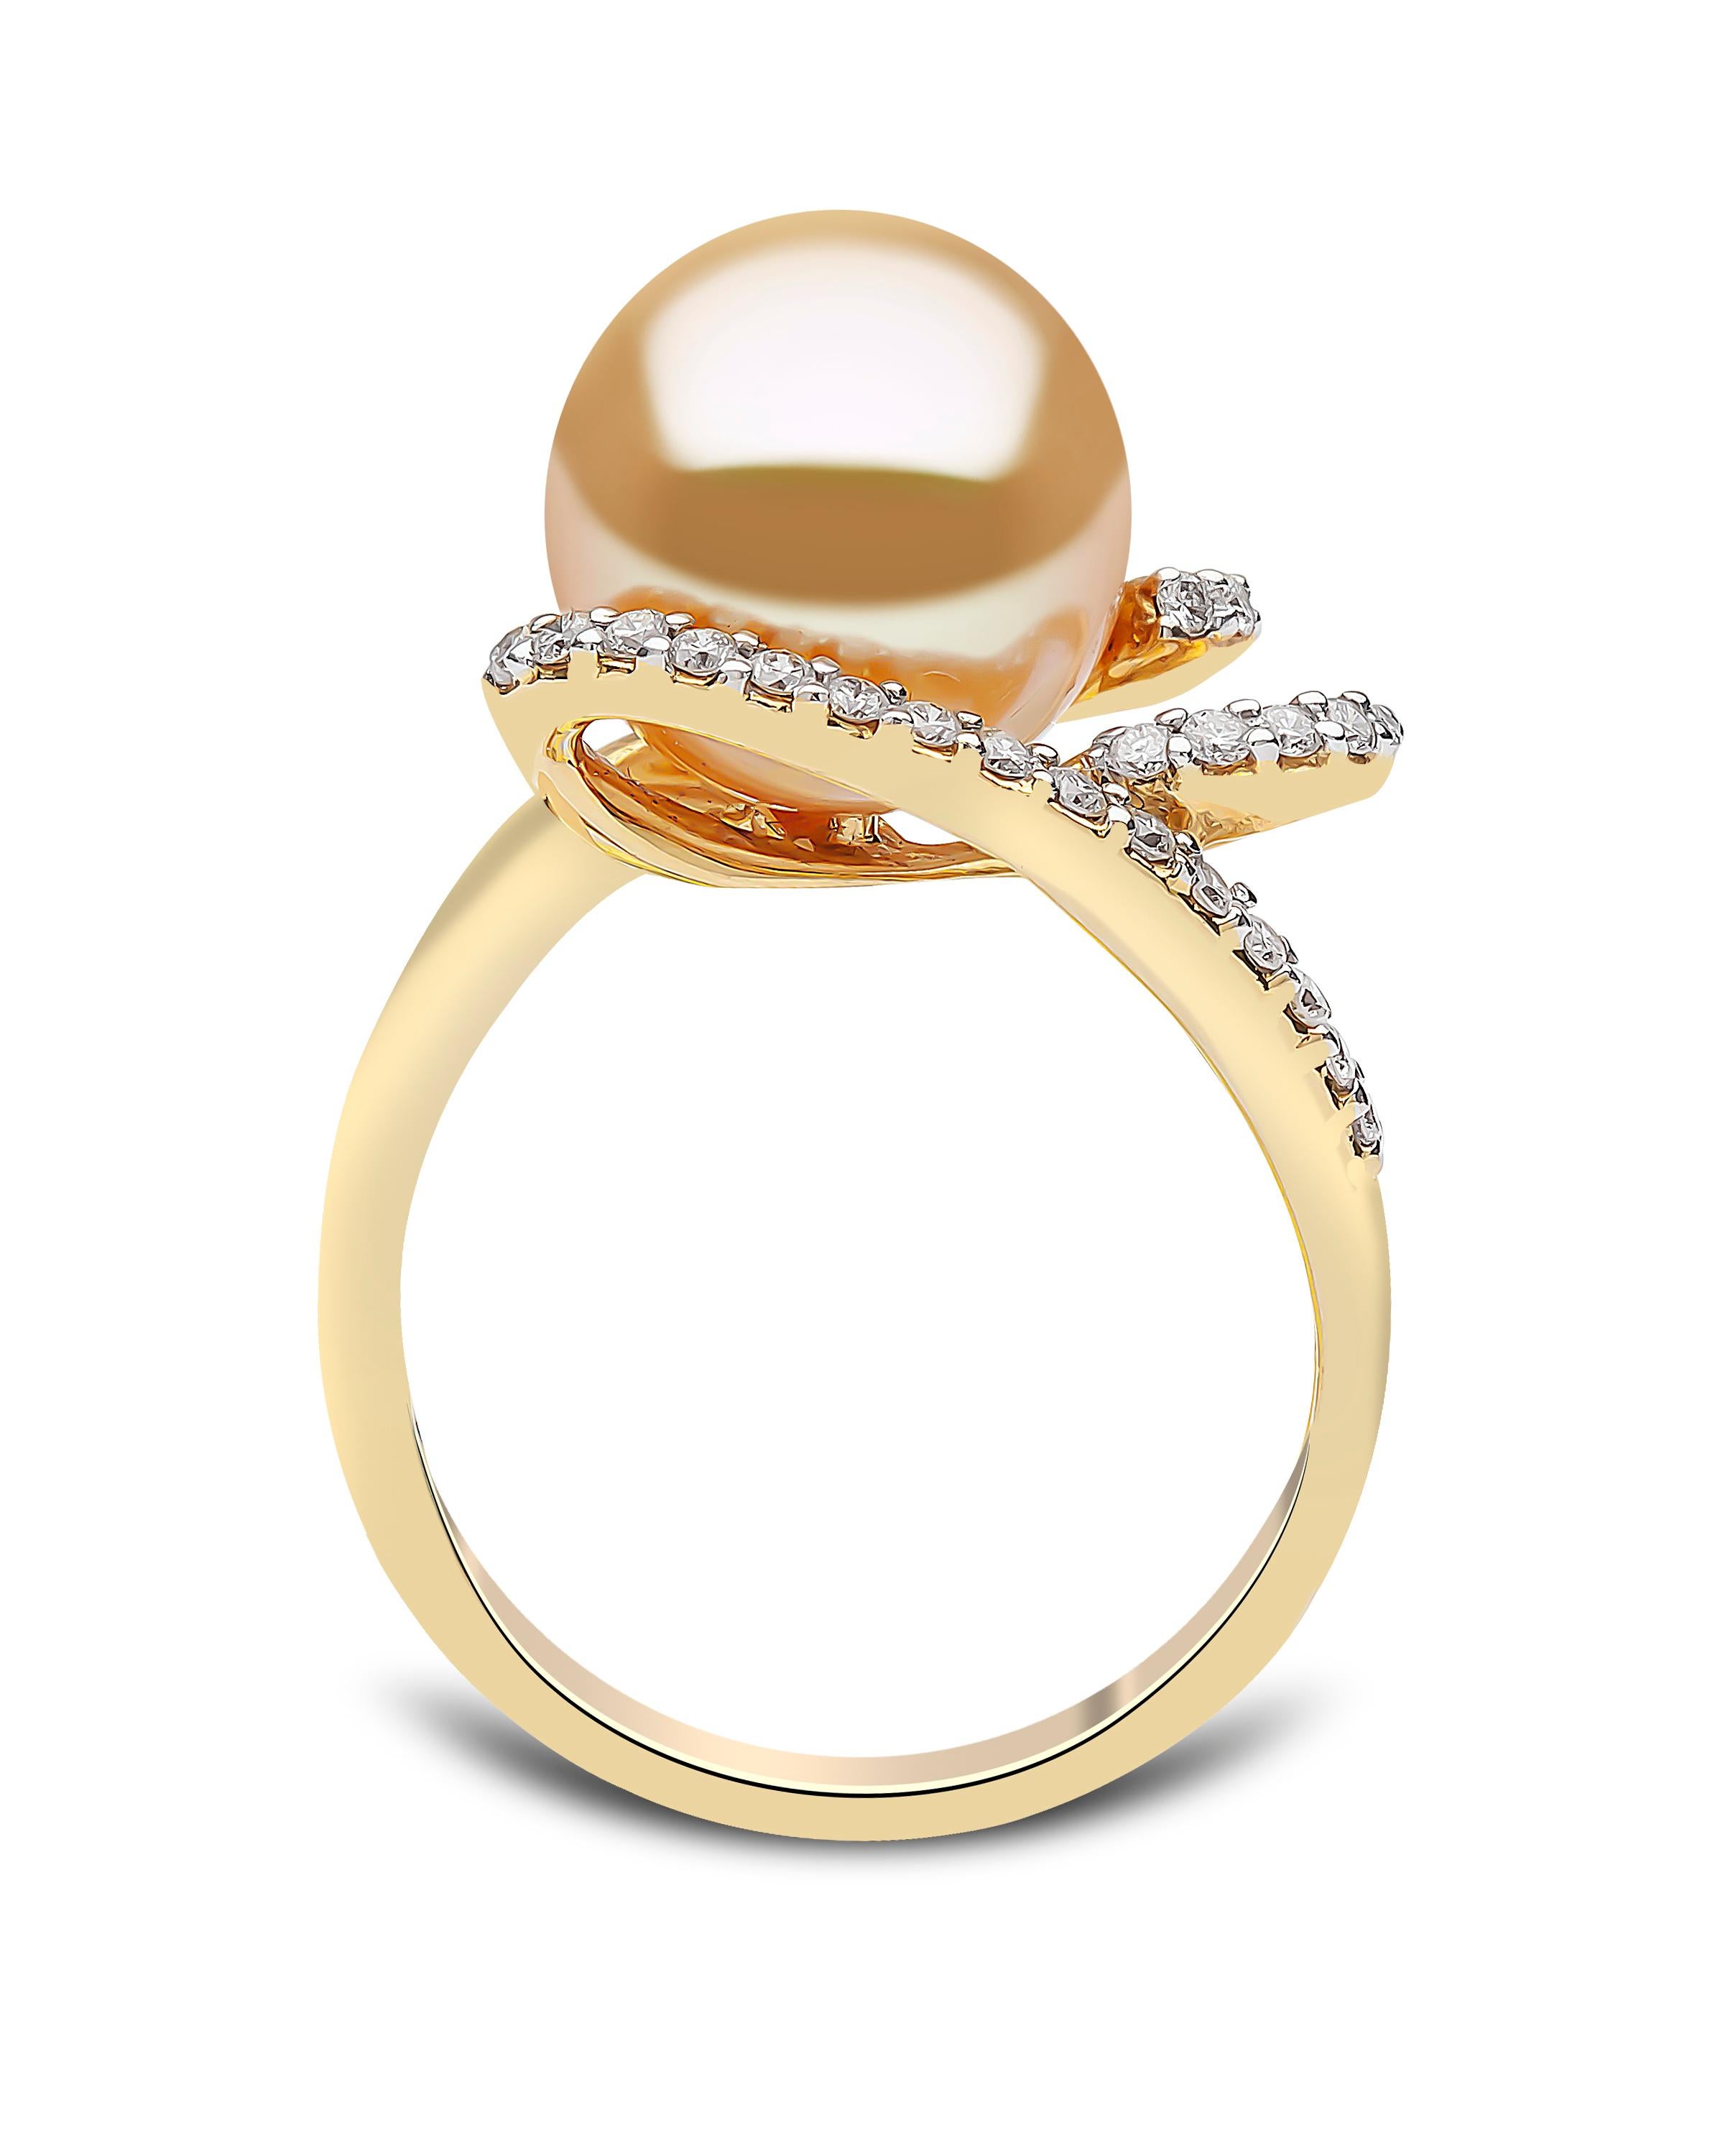 Contemporary Yoko London Golden South Sea Pearl and Diamond Ring Set in 18 Karat Yellow Gold For Sale